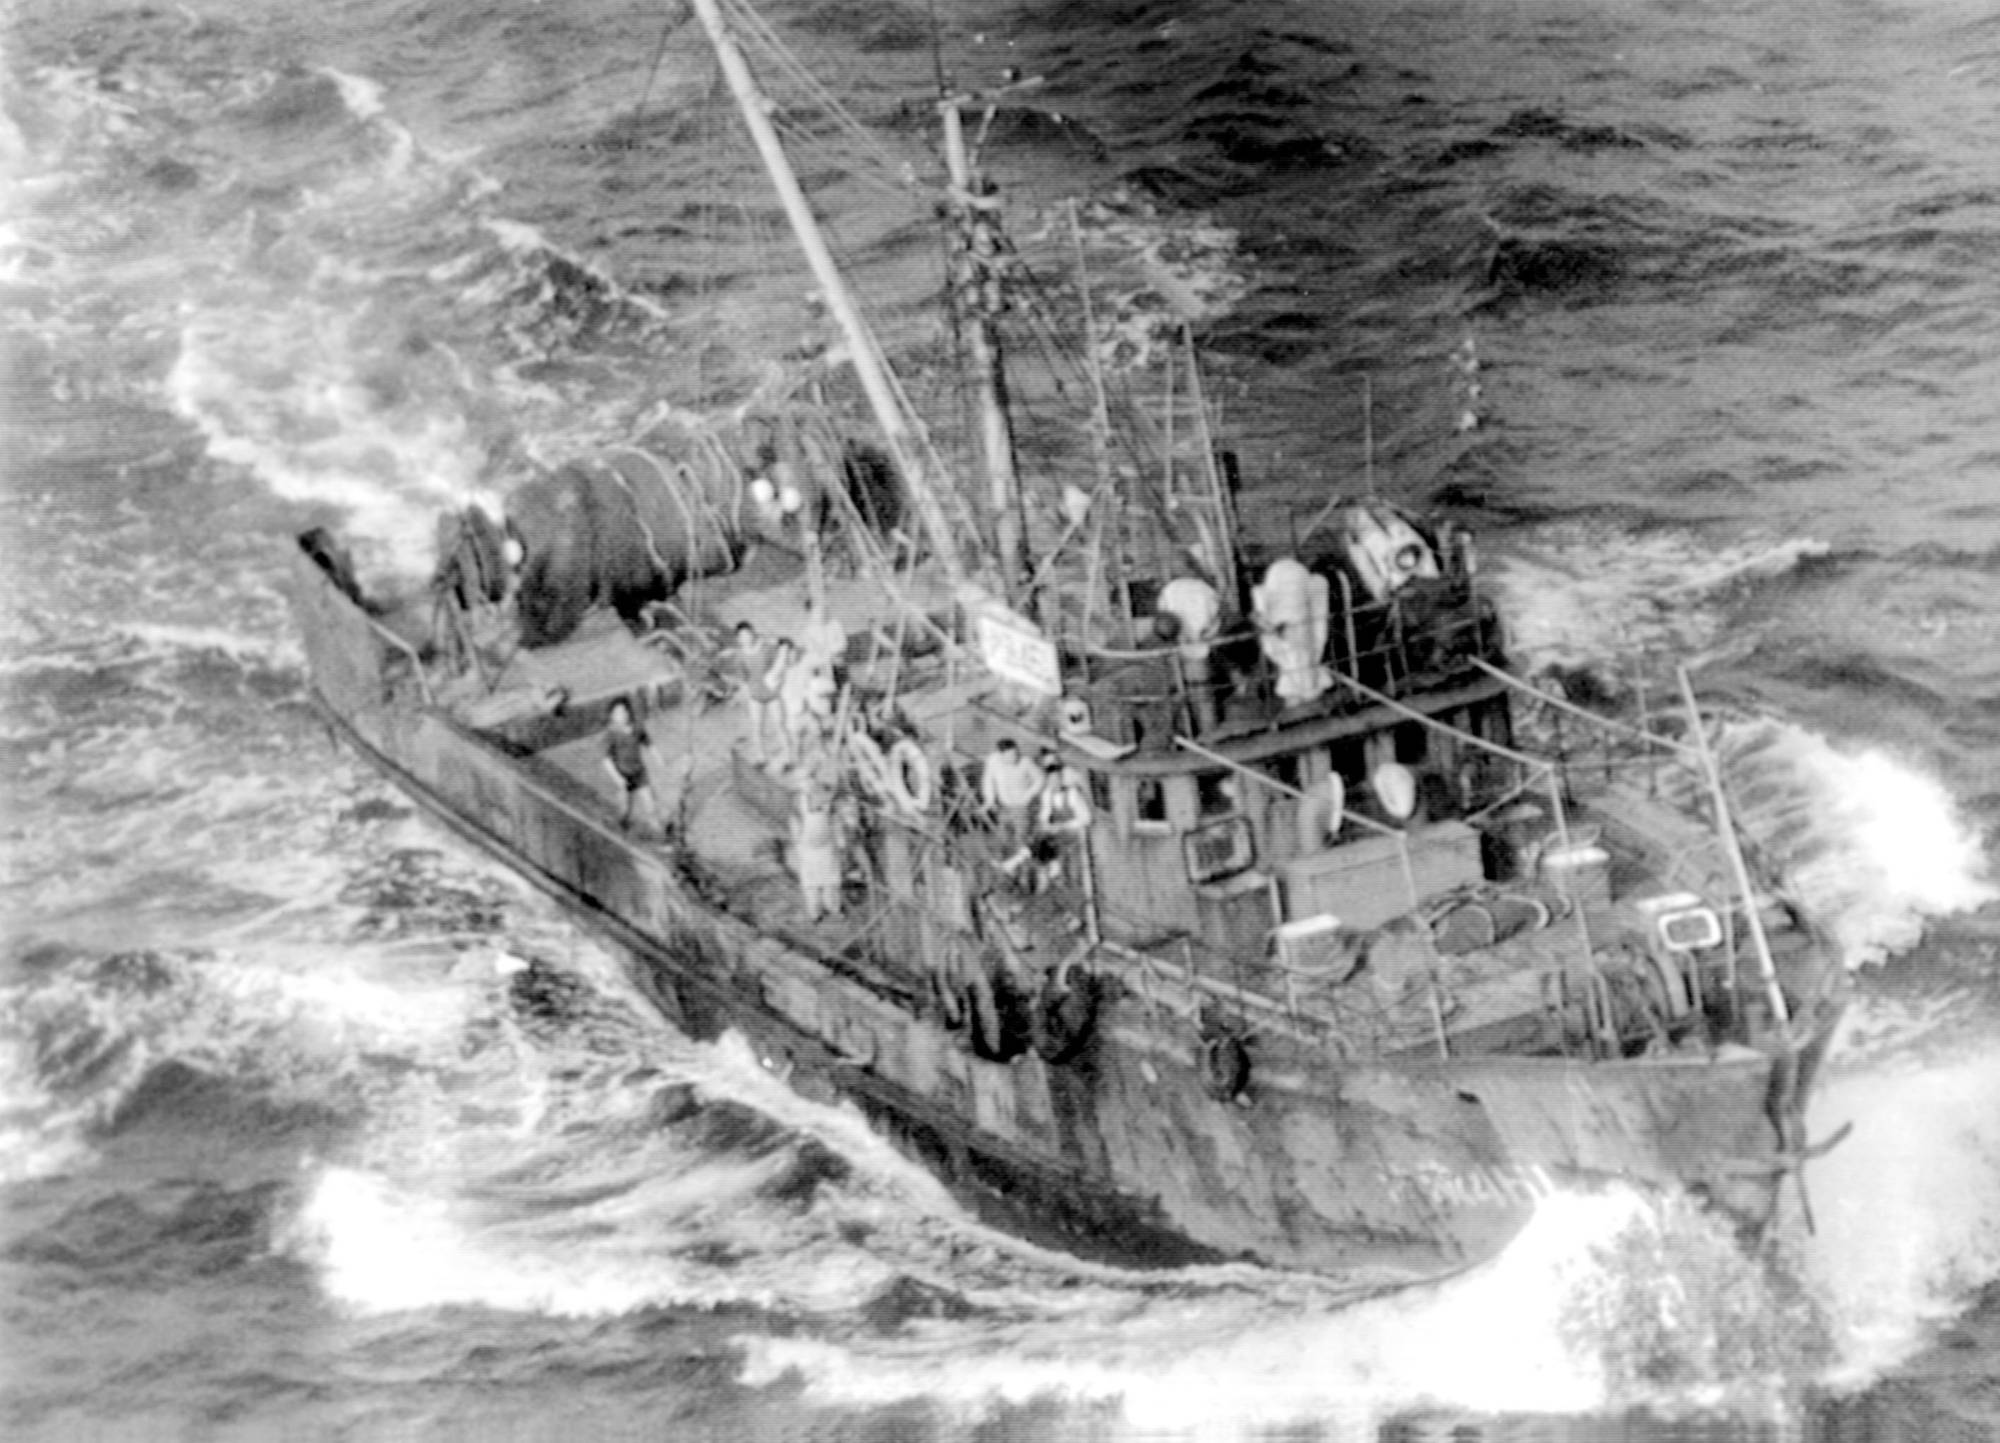 A Chinese fishing vessel enters the Japanese territorial waters around the Senkaku Islands in April 1978. | KYODO